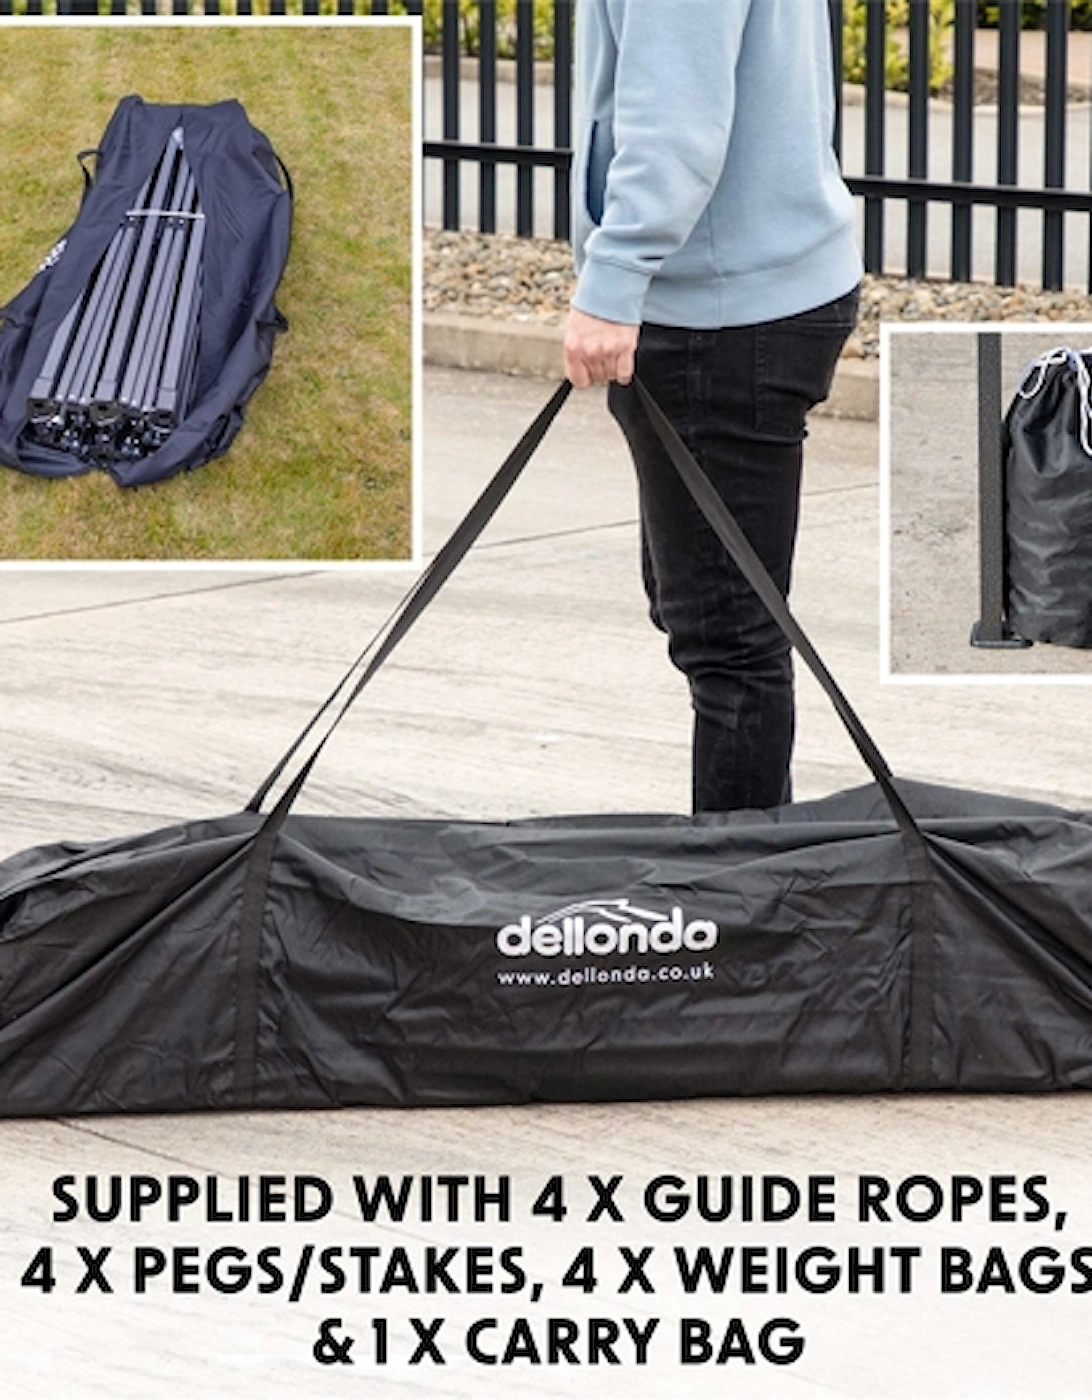 Premium 3x6m Pop-Up Gazebo & Side Walls, Water Resistant, Carry Bag, Stakes & Weight Bags Blue